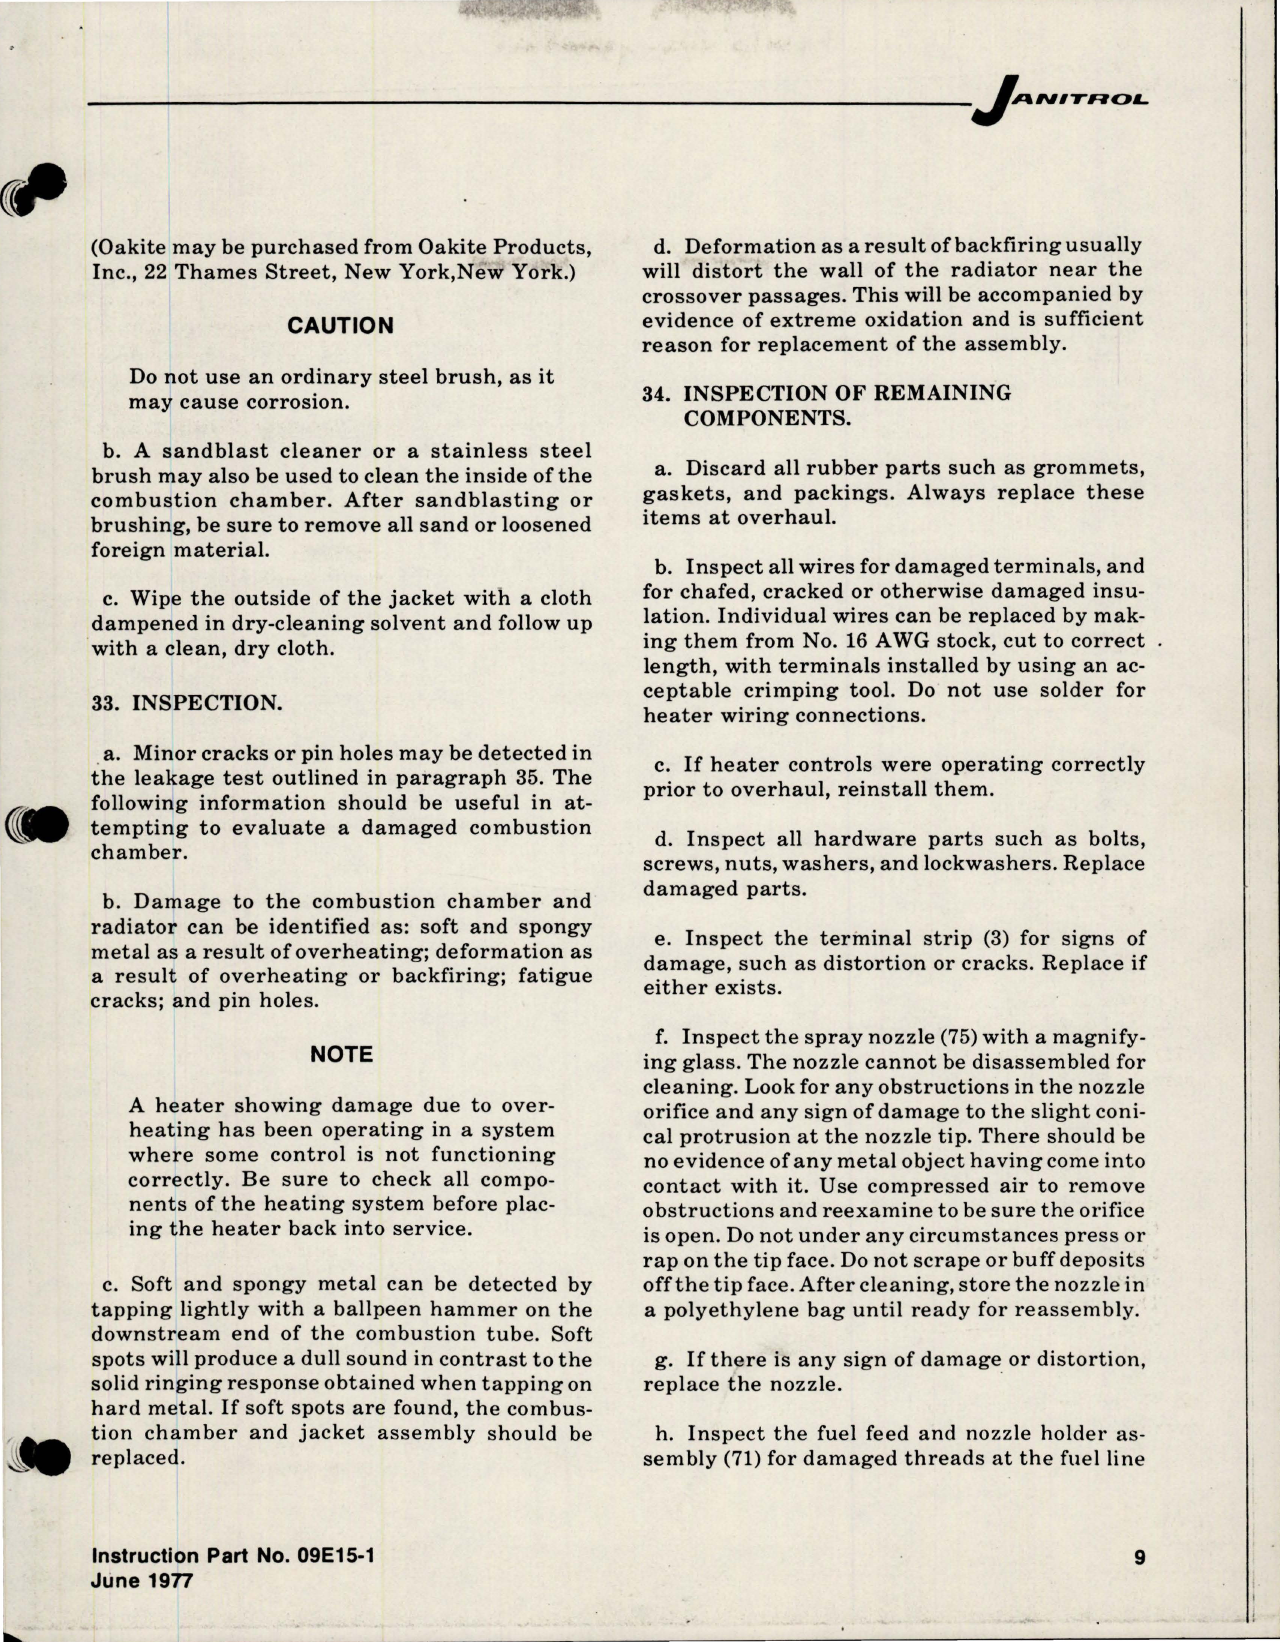 Sample page 9 from AirCorps Library document: Maintenance Instructions for Aircraft Heater Assembly - Part 07E94-1 